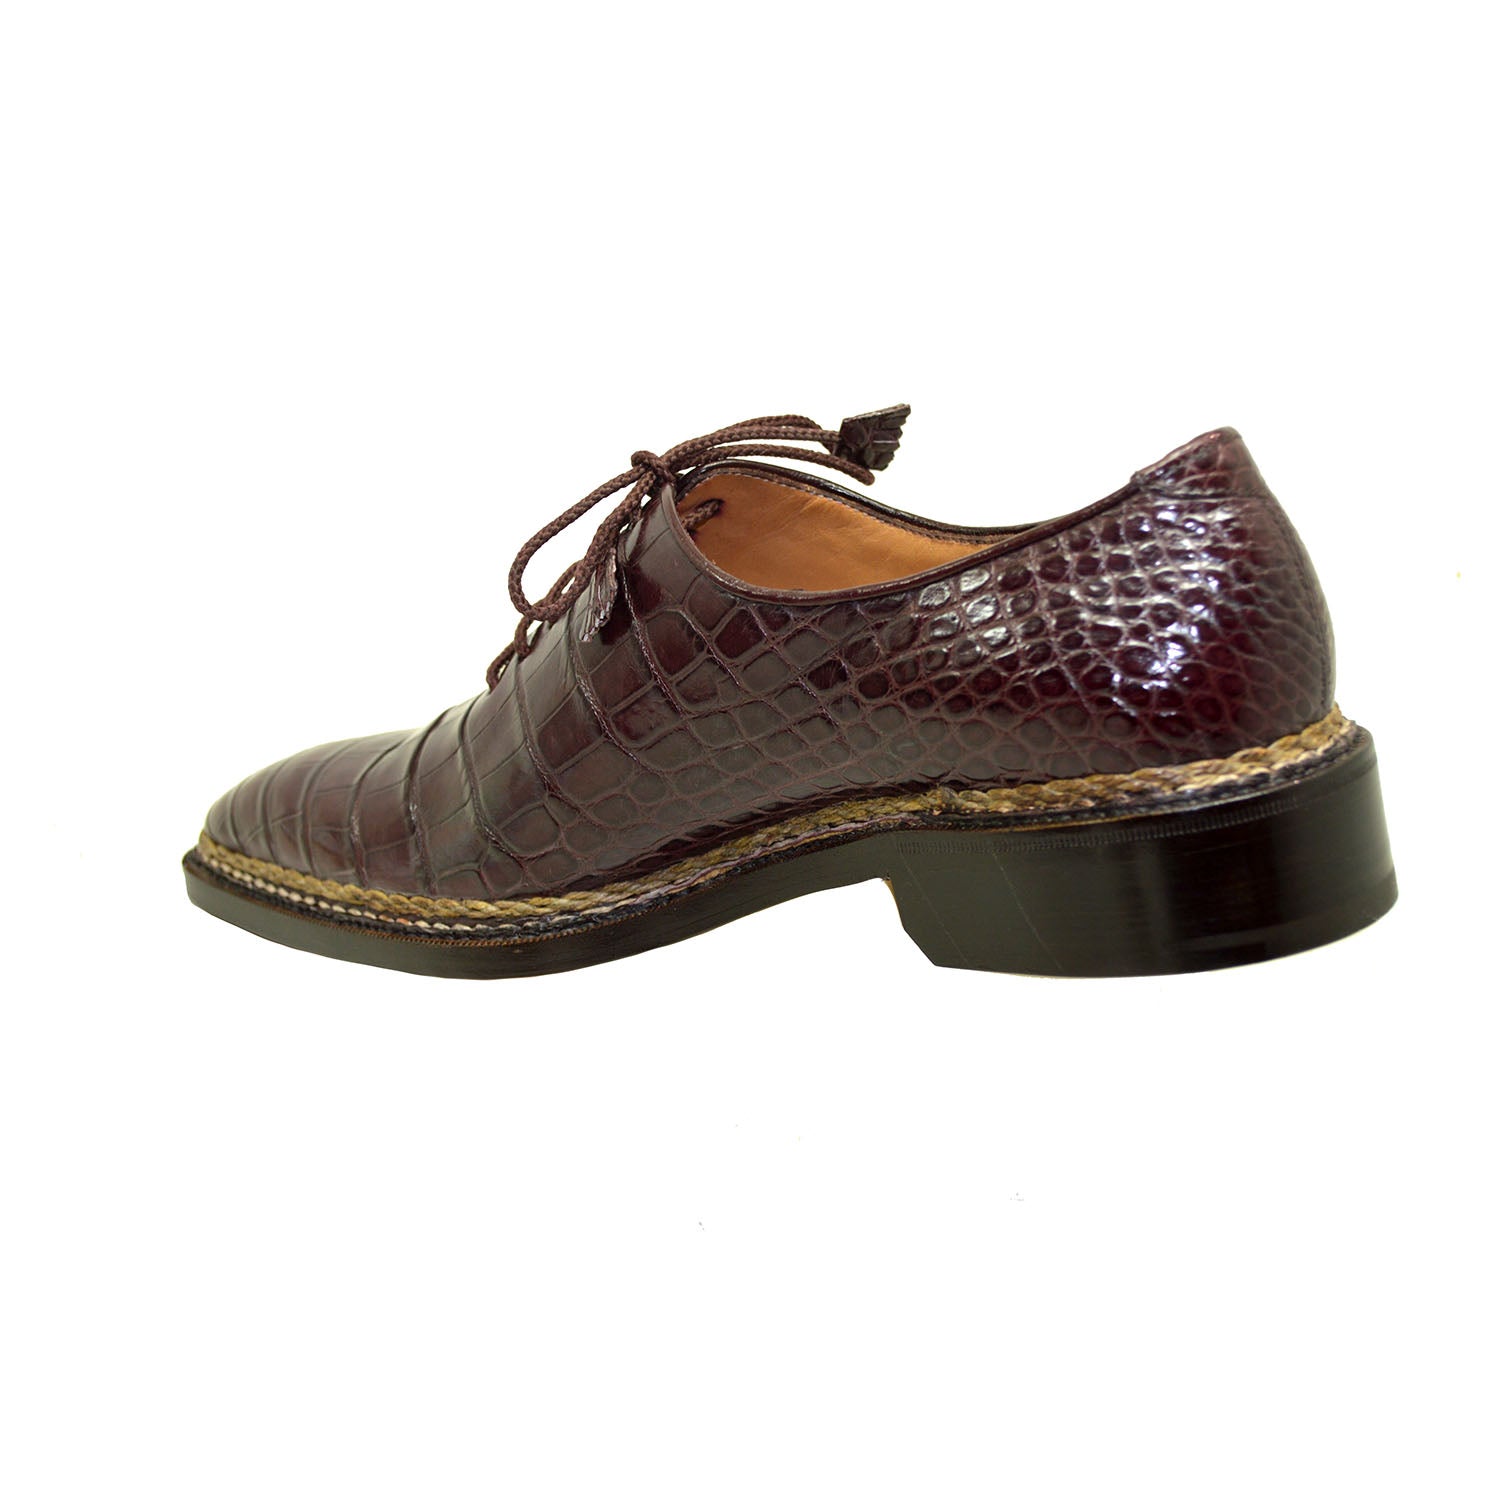 Caporicci 1400 Baby Alligator Lace Up Brown